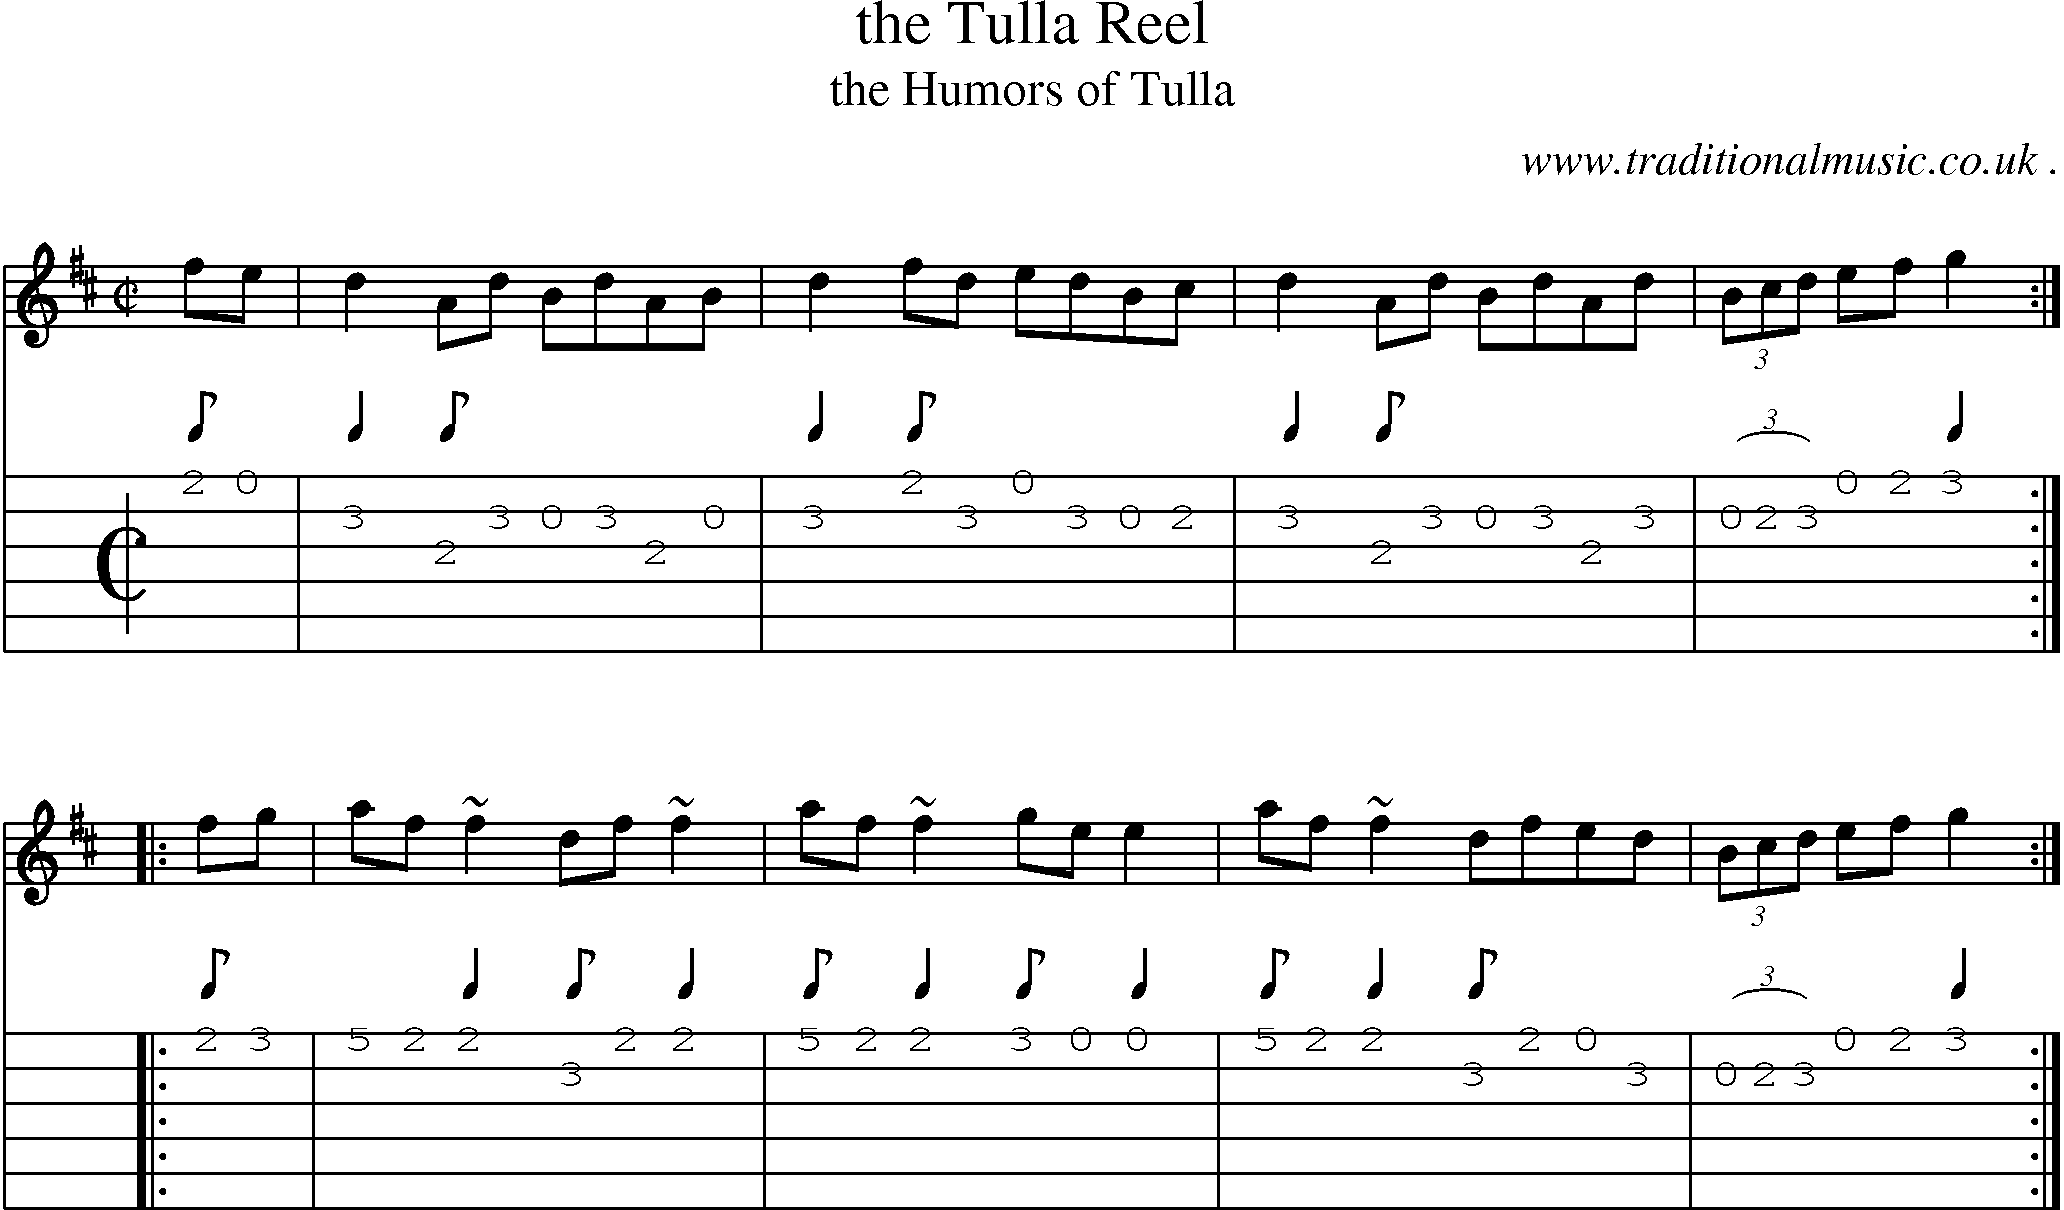 Sheet-music  score, Chords and Guitar Tabs for The Tulla Reel